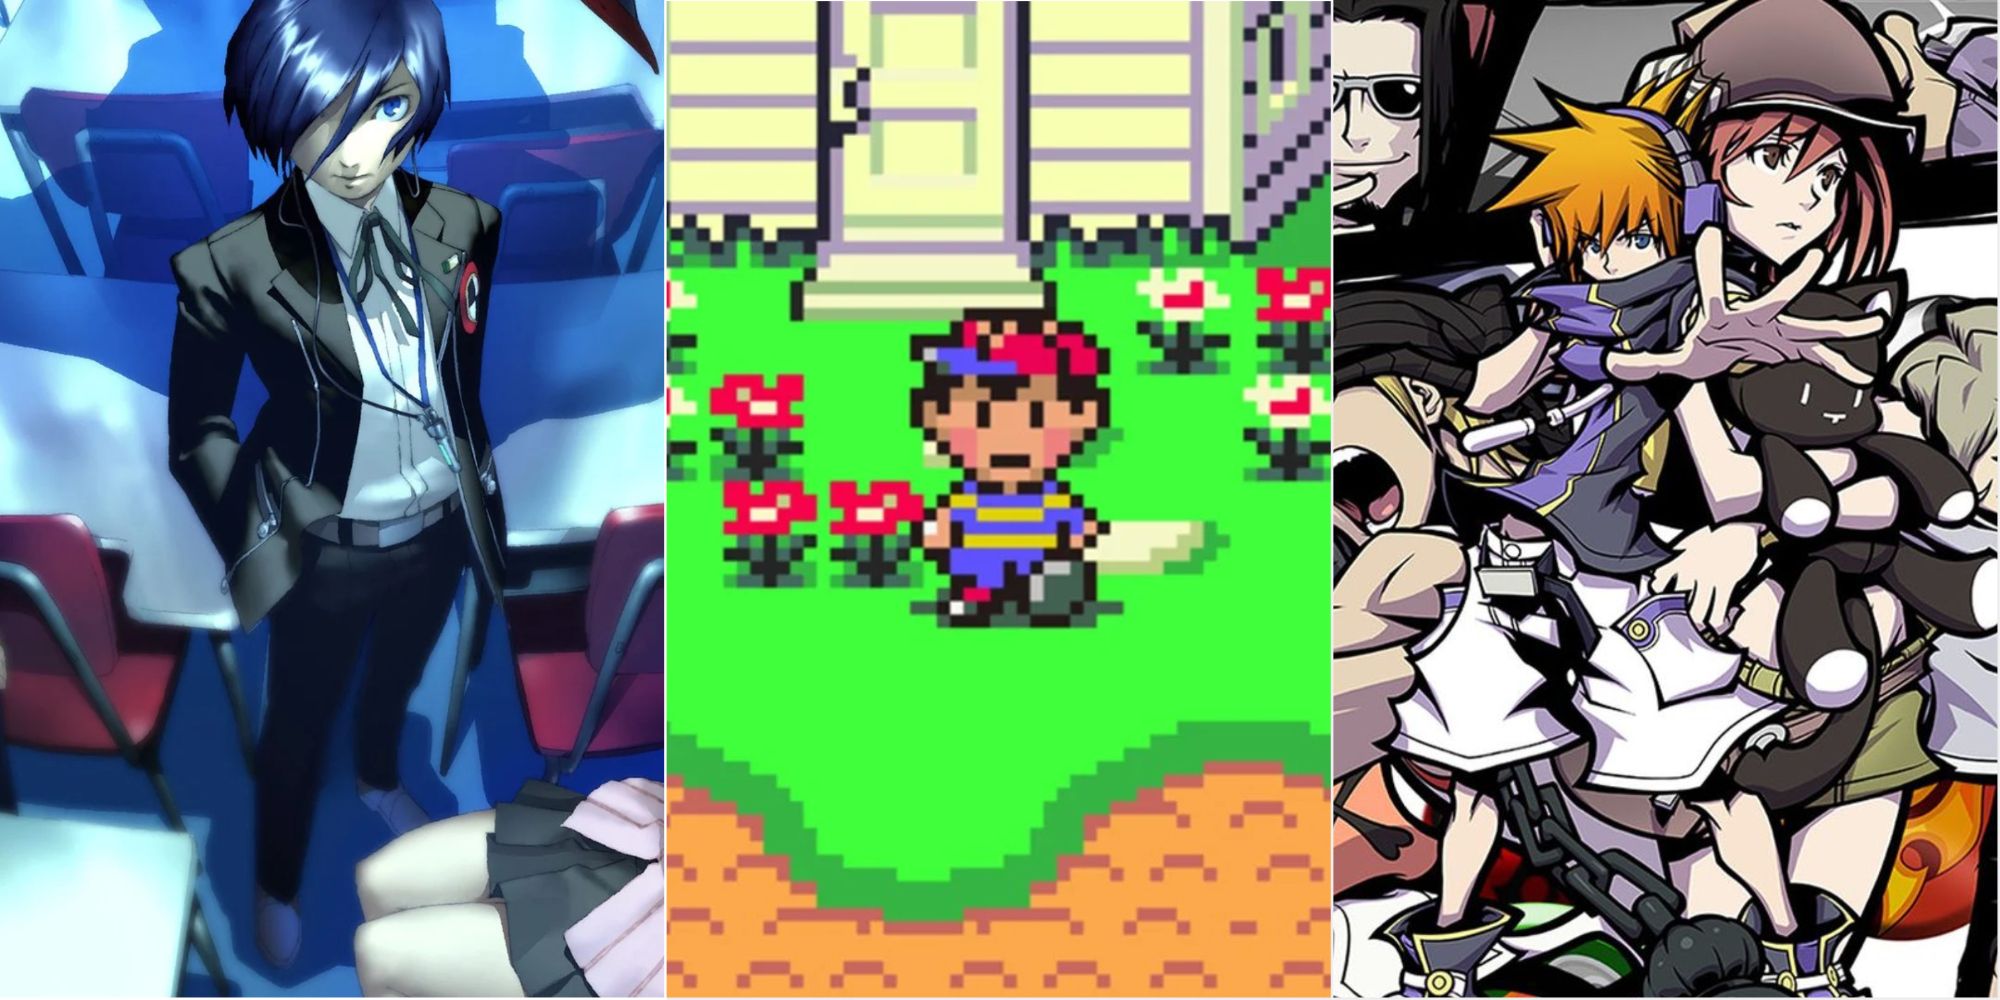 RPG Adventures To Skip Featured - Persona 3, Earthbound